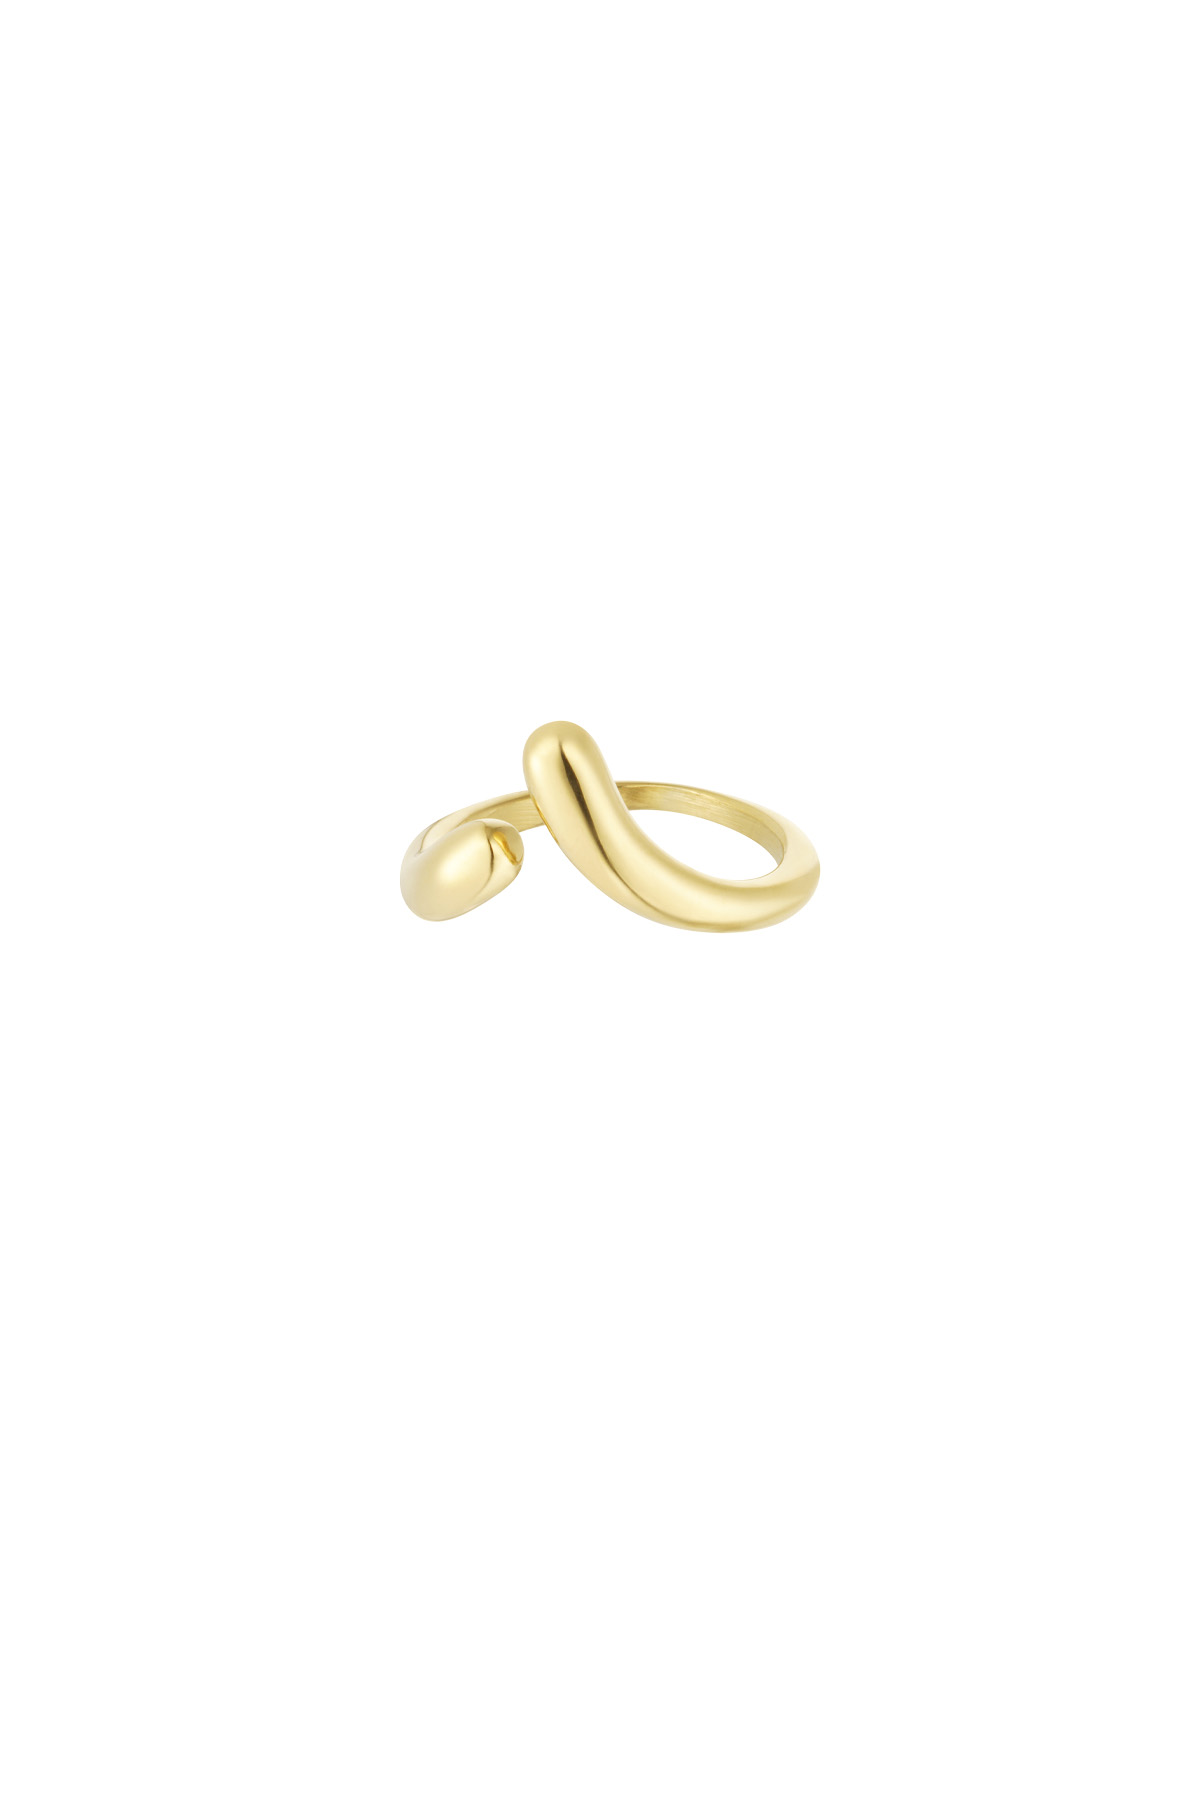 Ring simplicity rules - goud